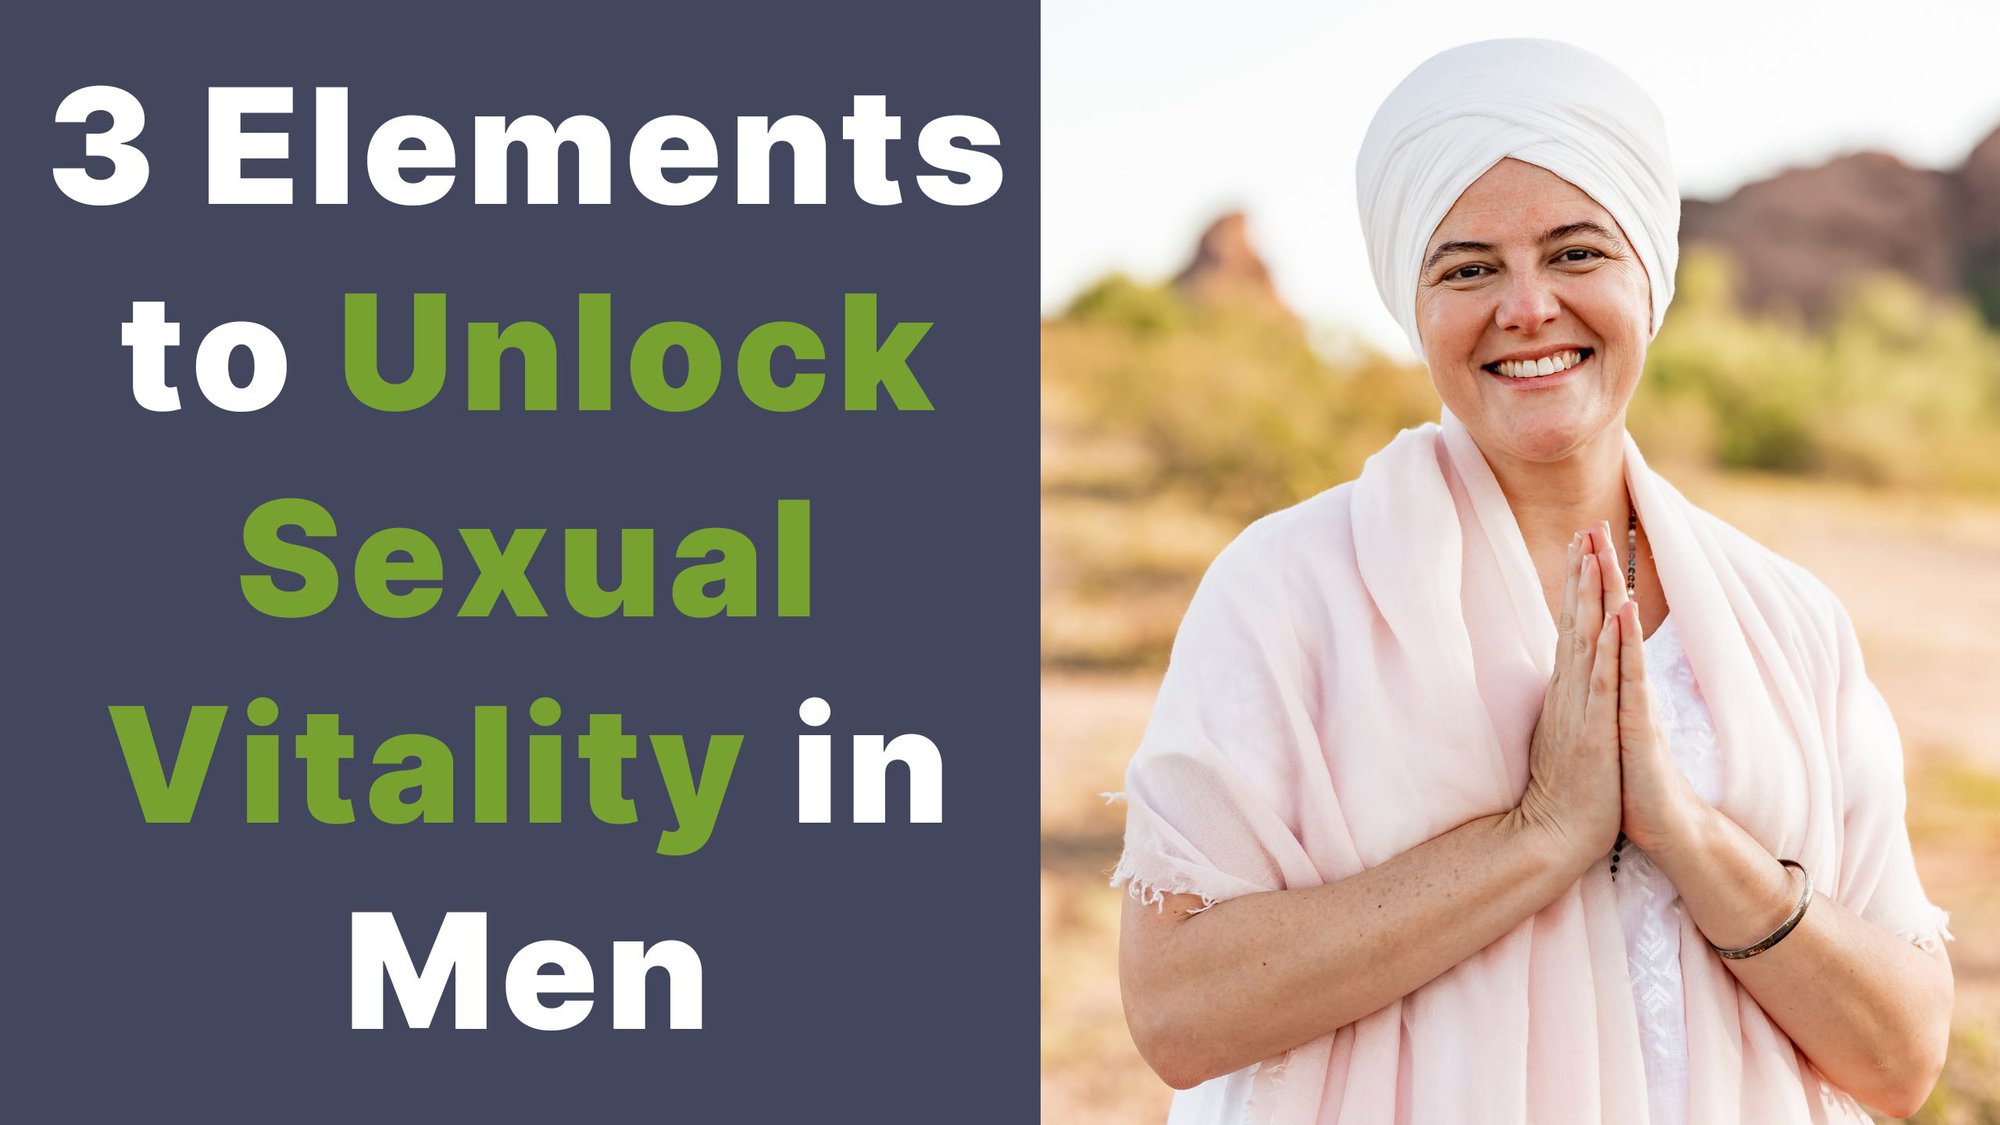 3 Elements to Unlock Sexual Vitality in Men cover